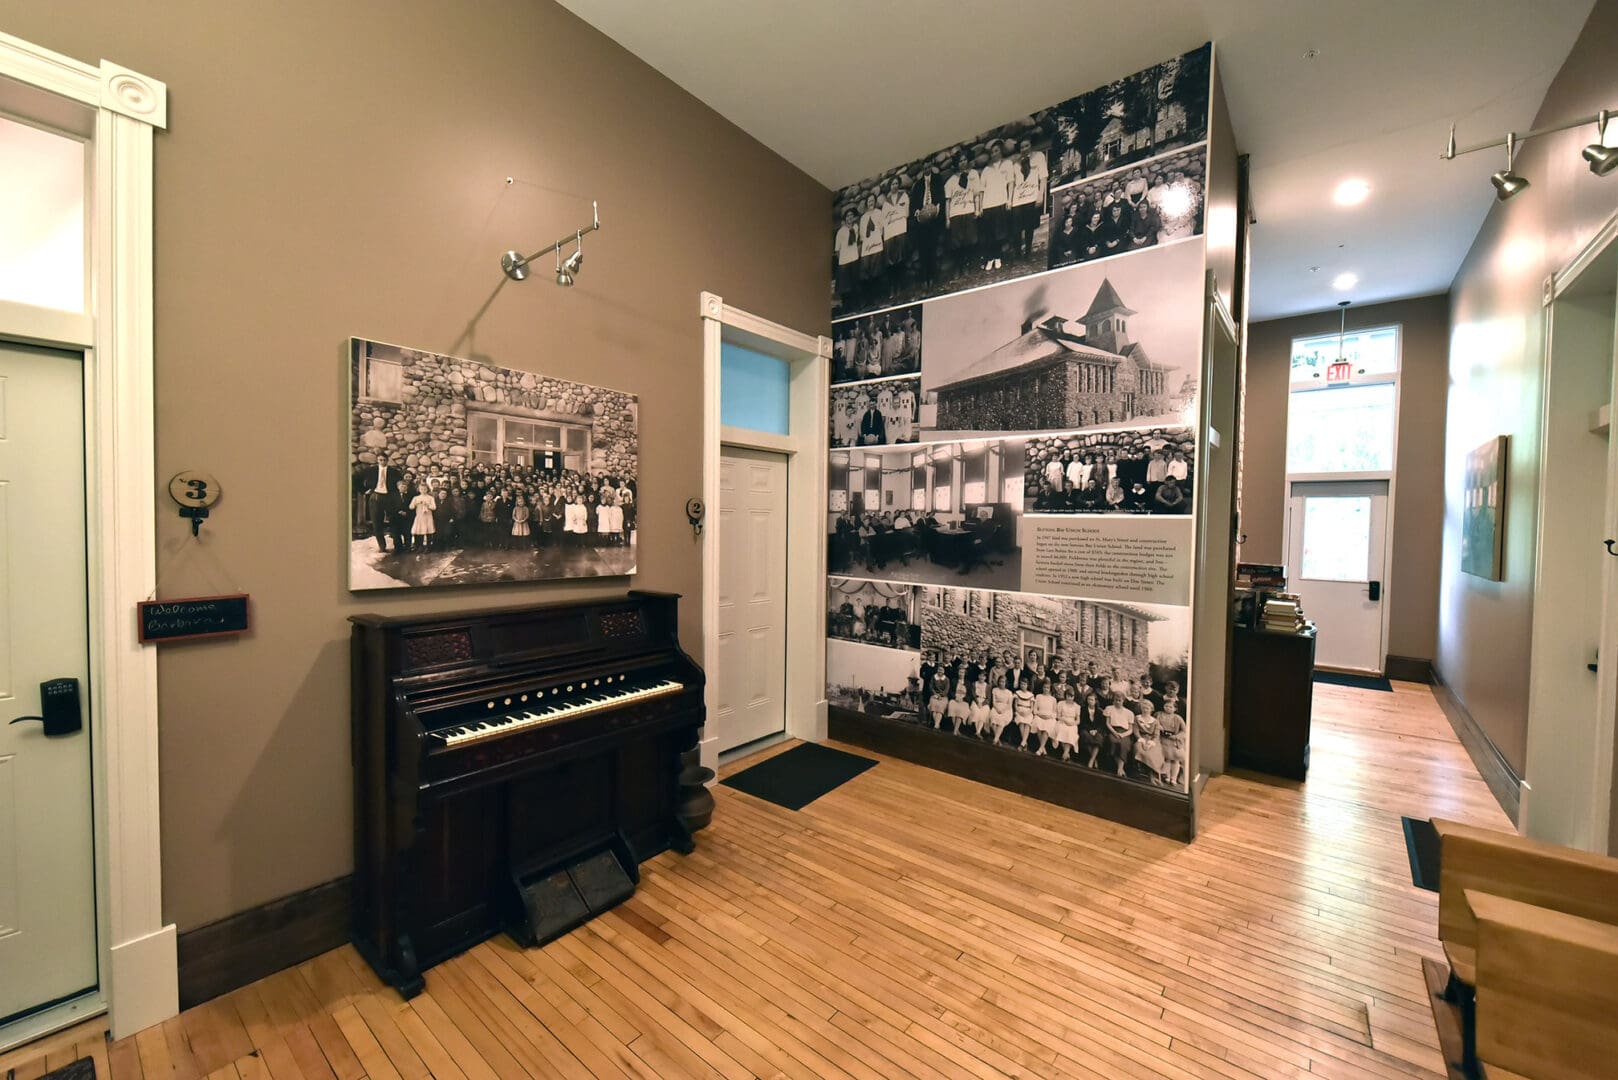 A piano in the middle of a room with a wall mural.